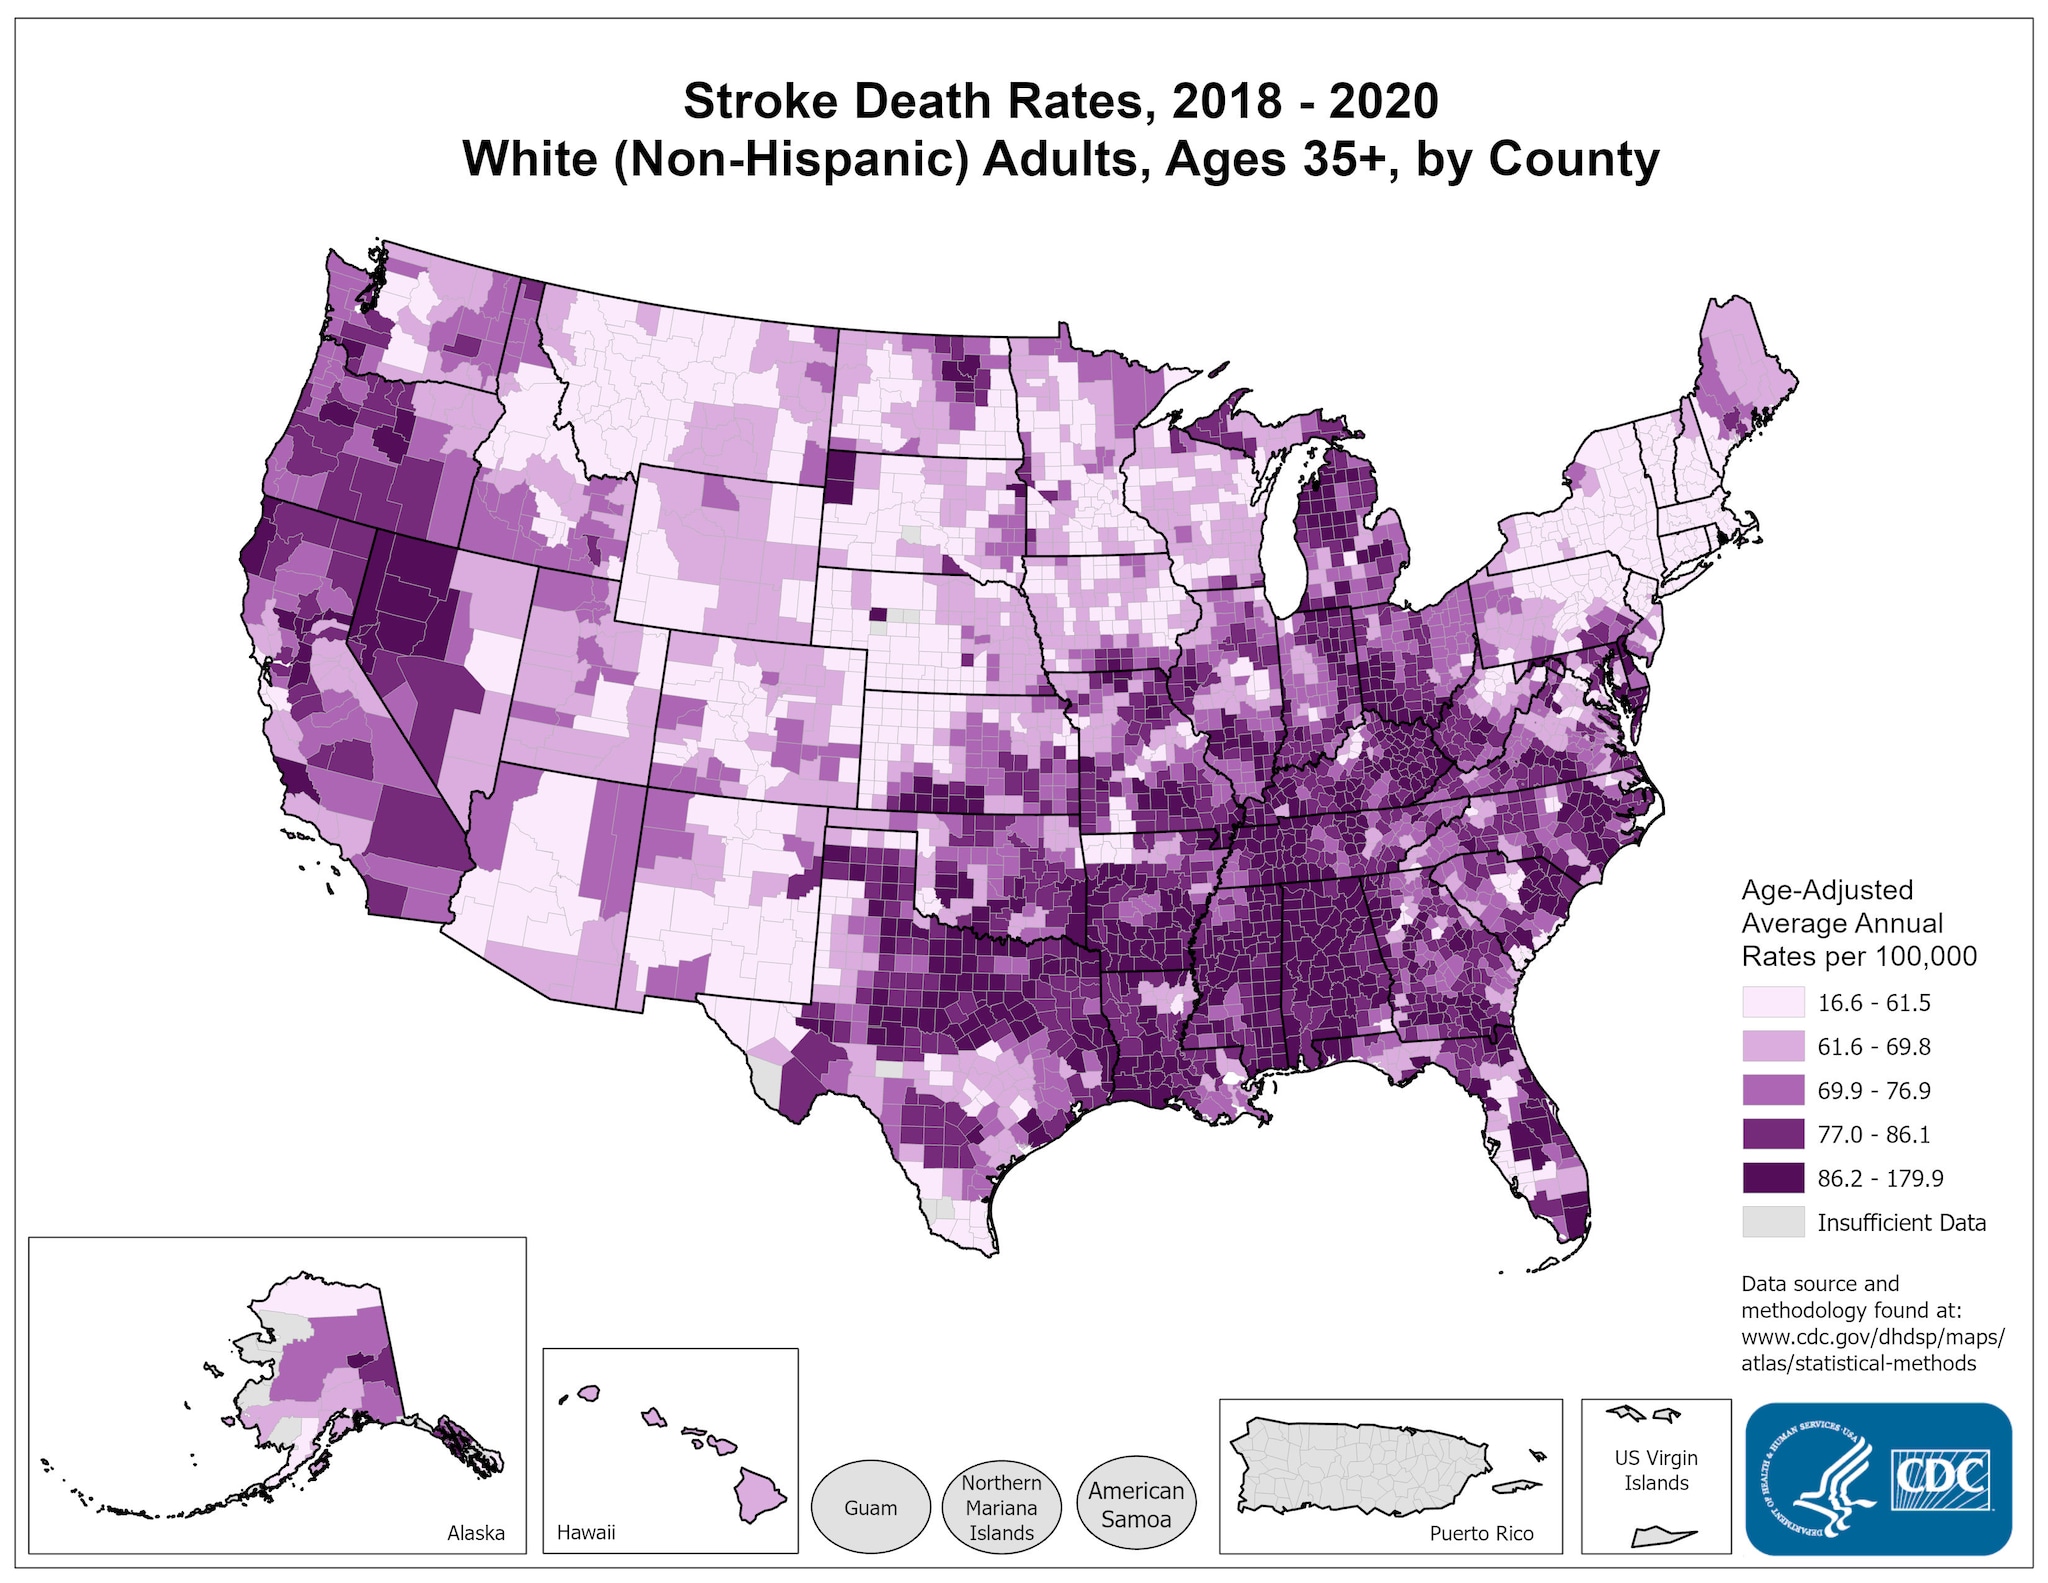 Stroke Death Rates for 2018 through 2020 for Whites Aged 35 Years and Older by County